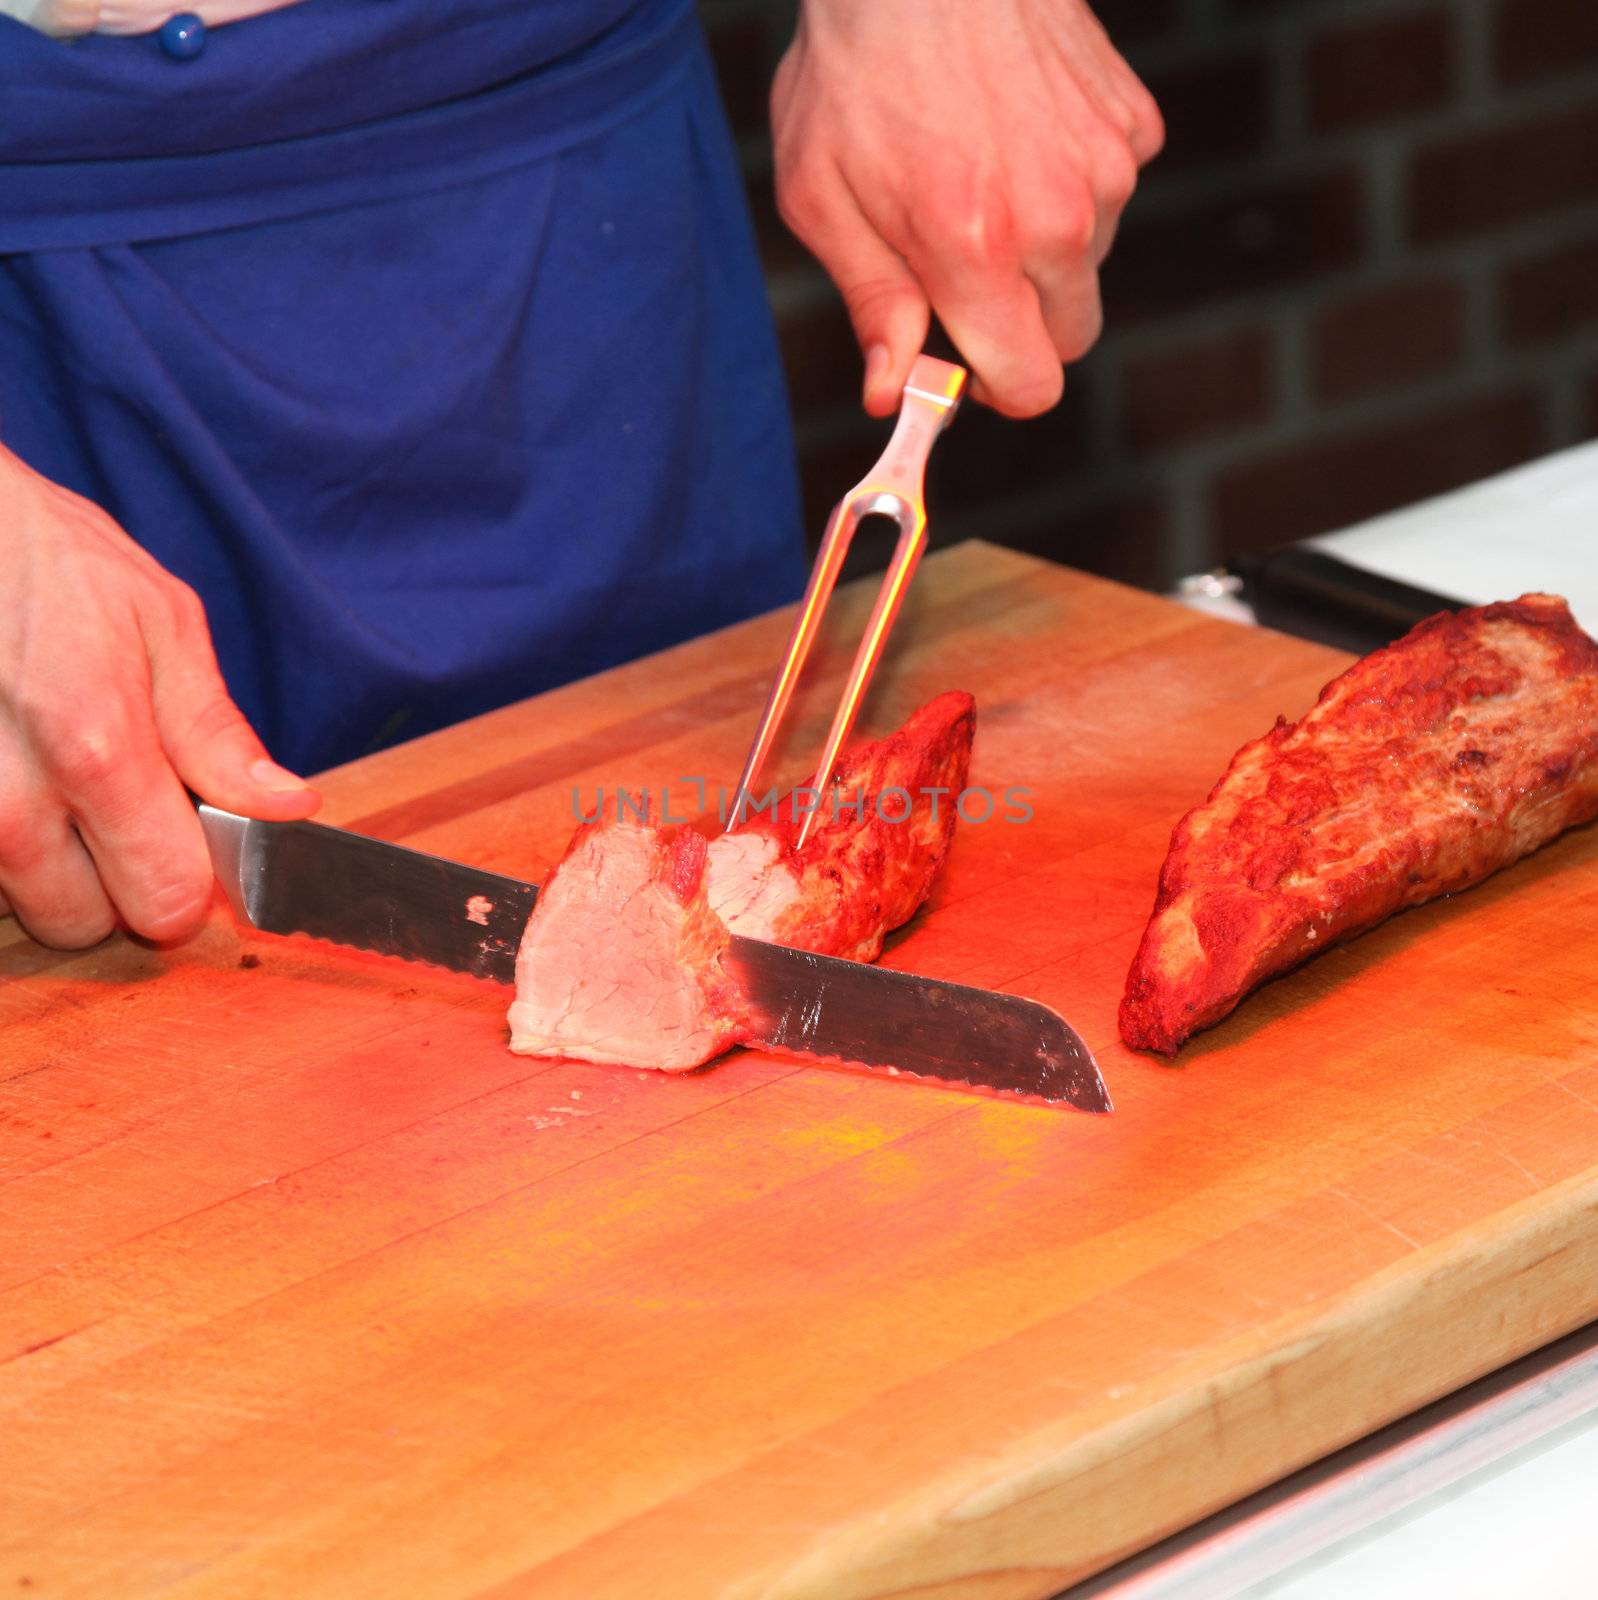 A cook cuts meat at the buffet - square
